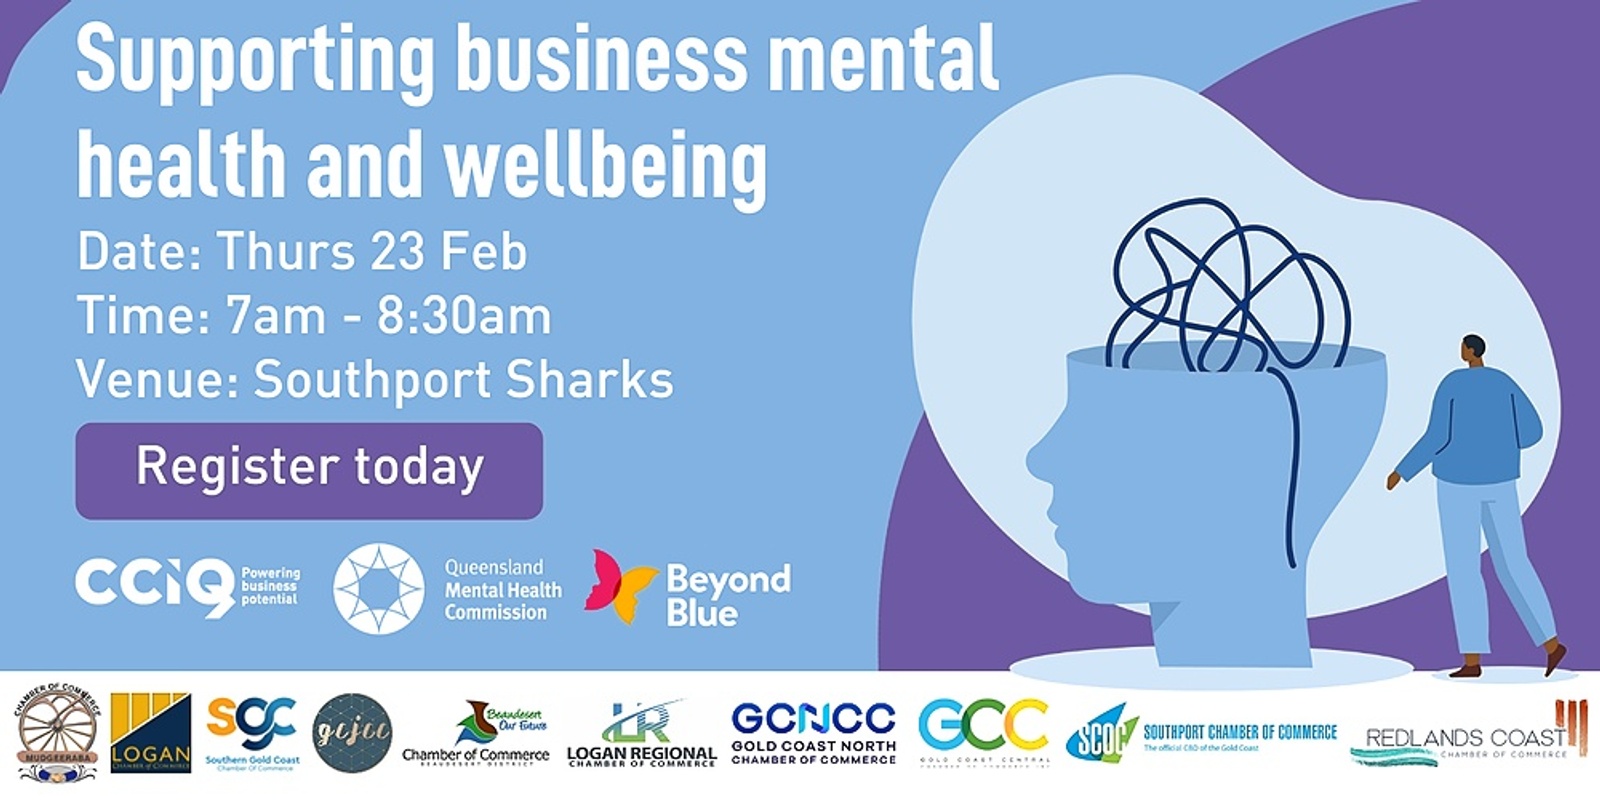 Banner image for Supporting business mental health and wellbeing - Gold Coast